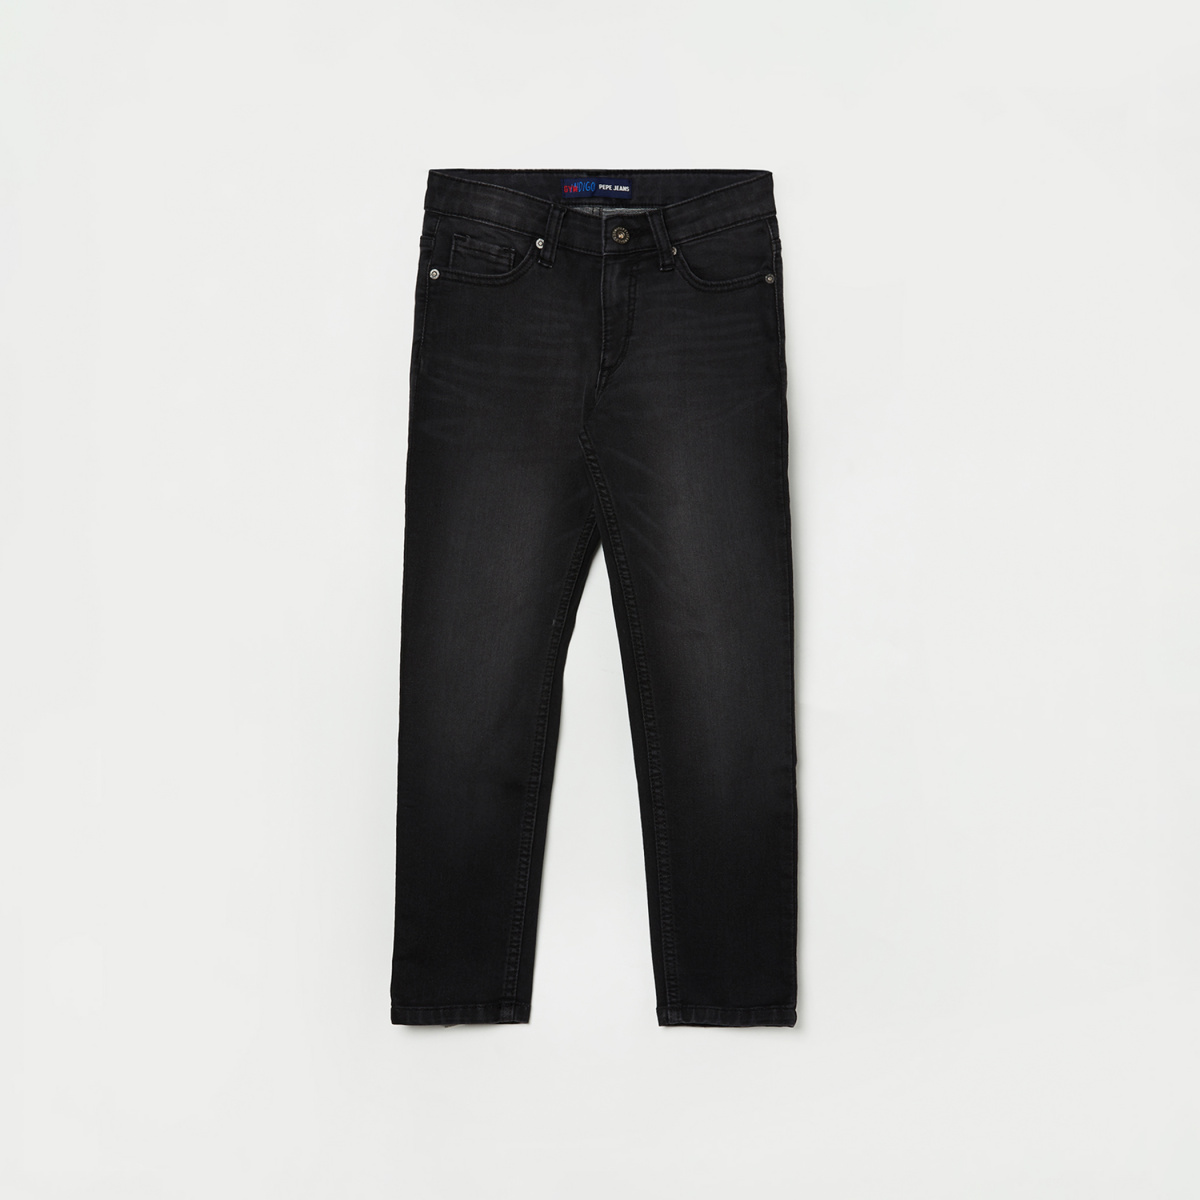 PEPE JEANS Boys Solid Slim Fit Jeans